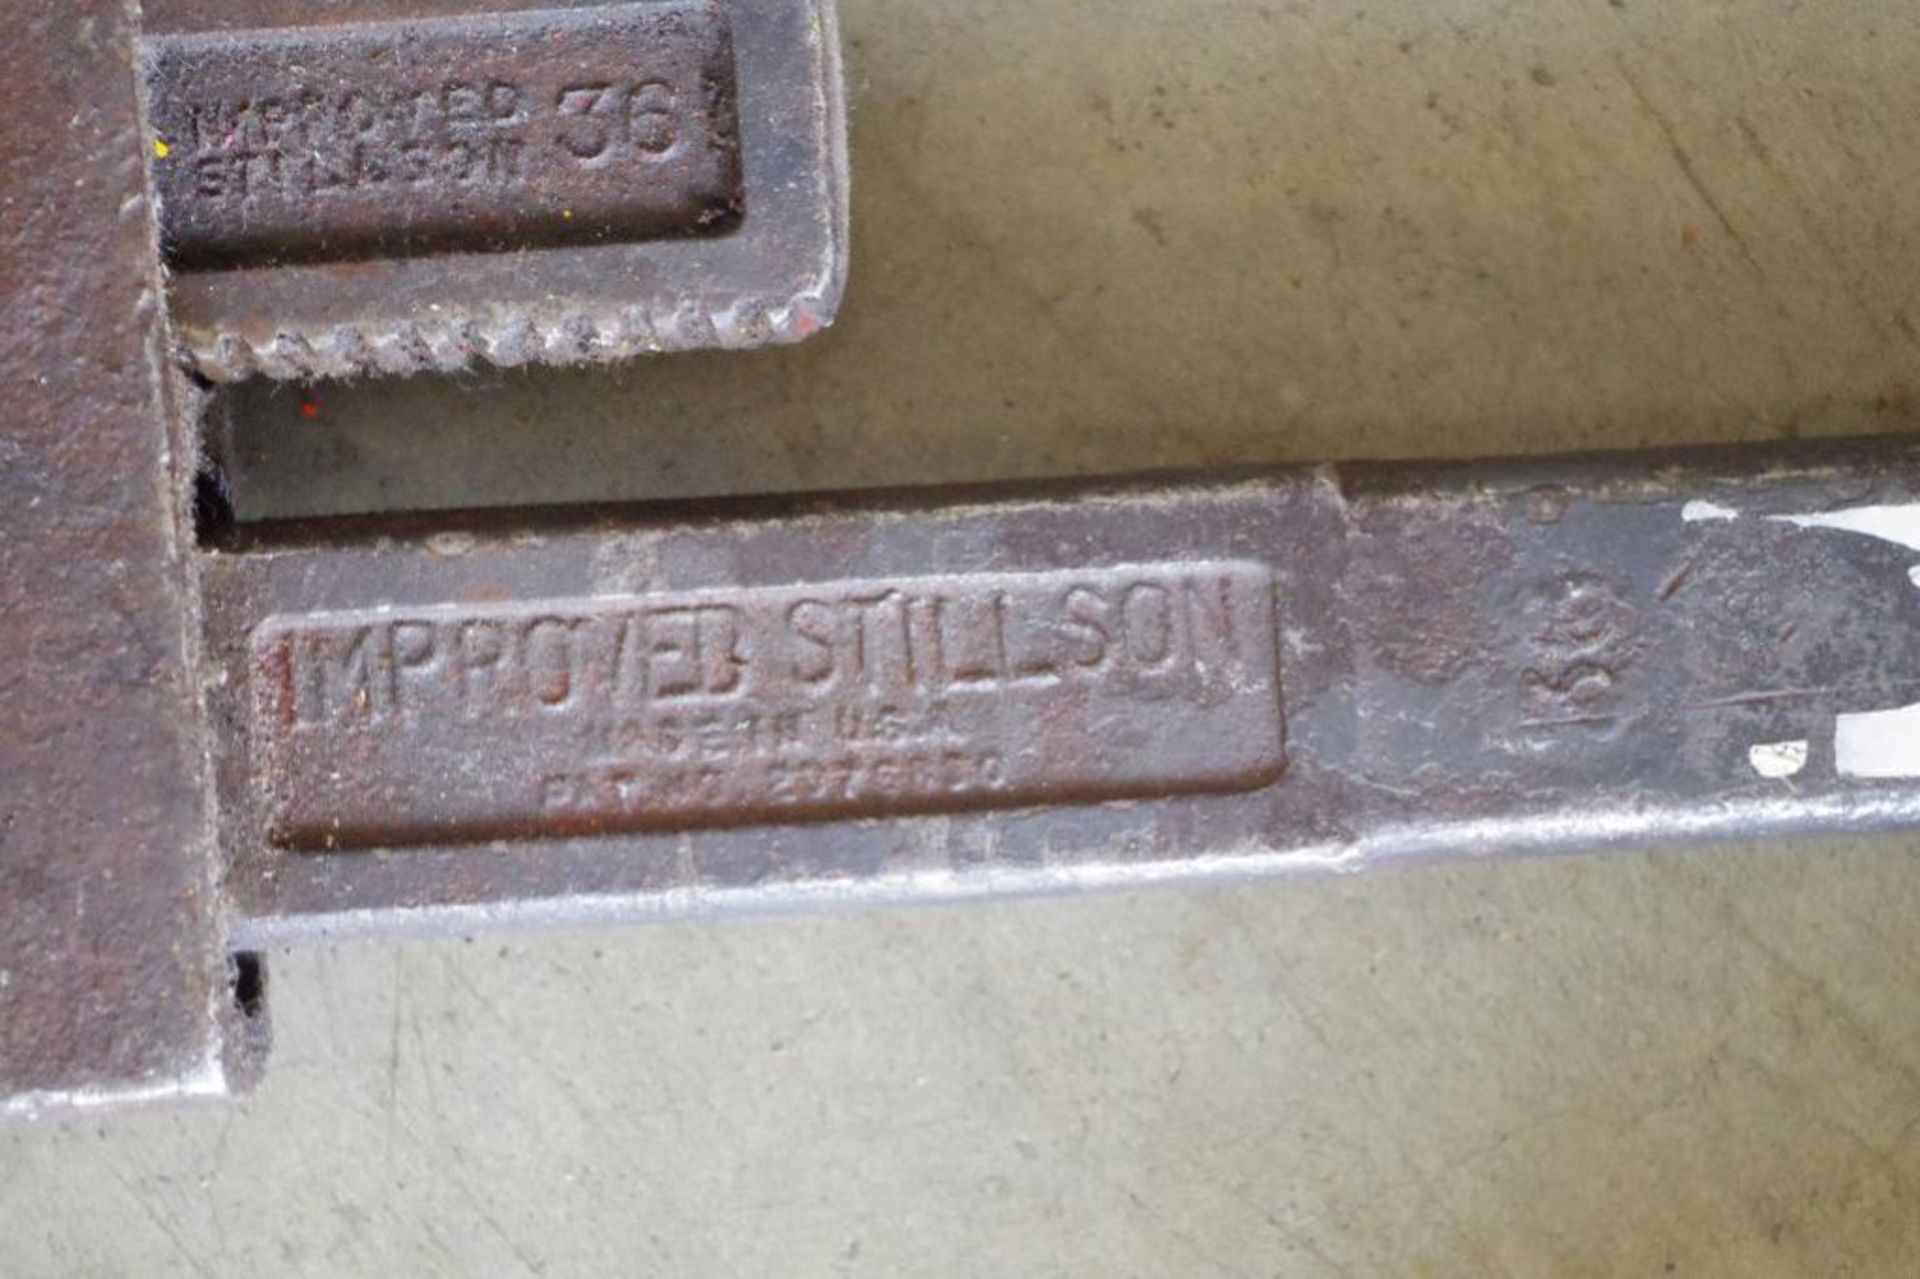 Double Bit Axe & IMPROVED STILLSON 36" Pipe Wrench - Image 2 of 3